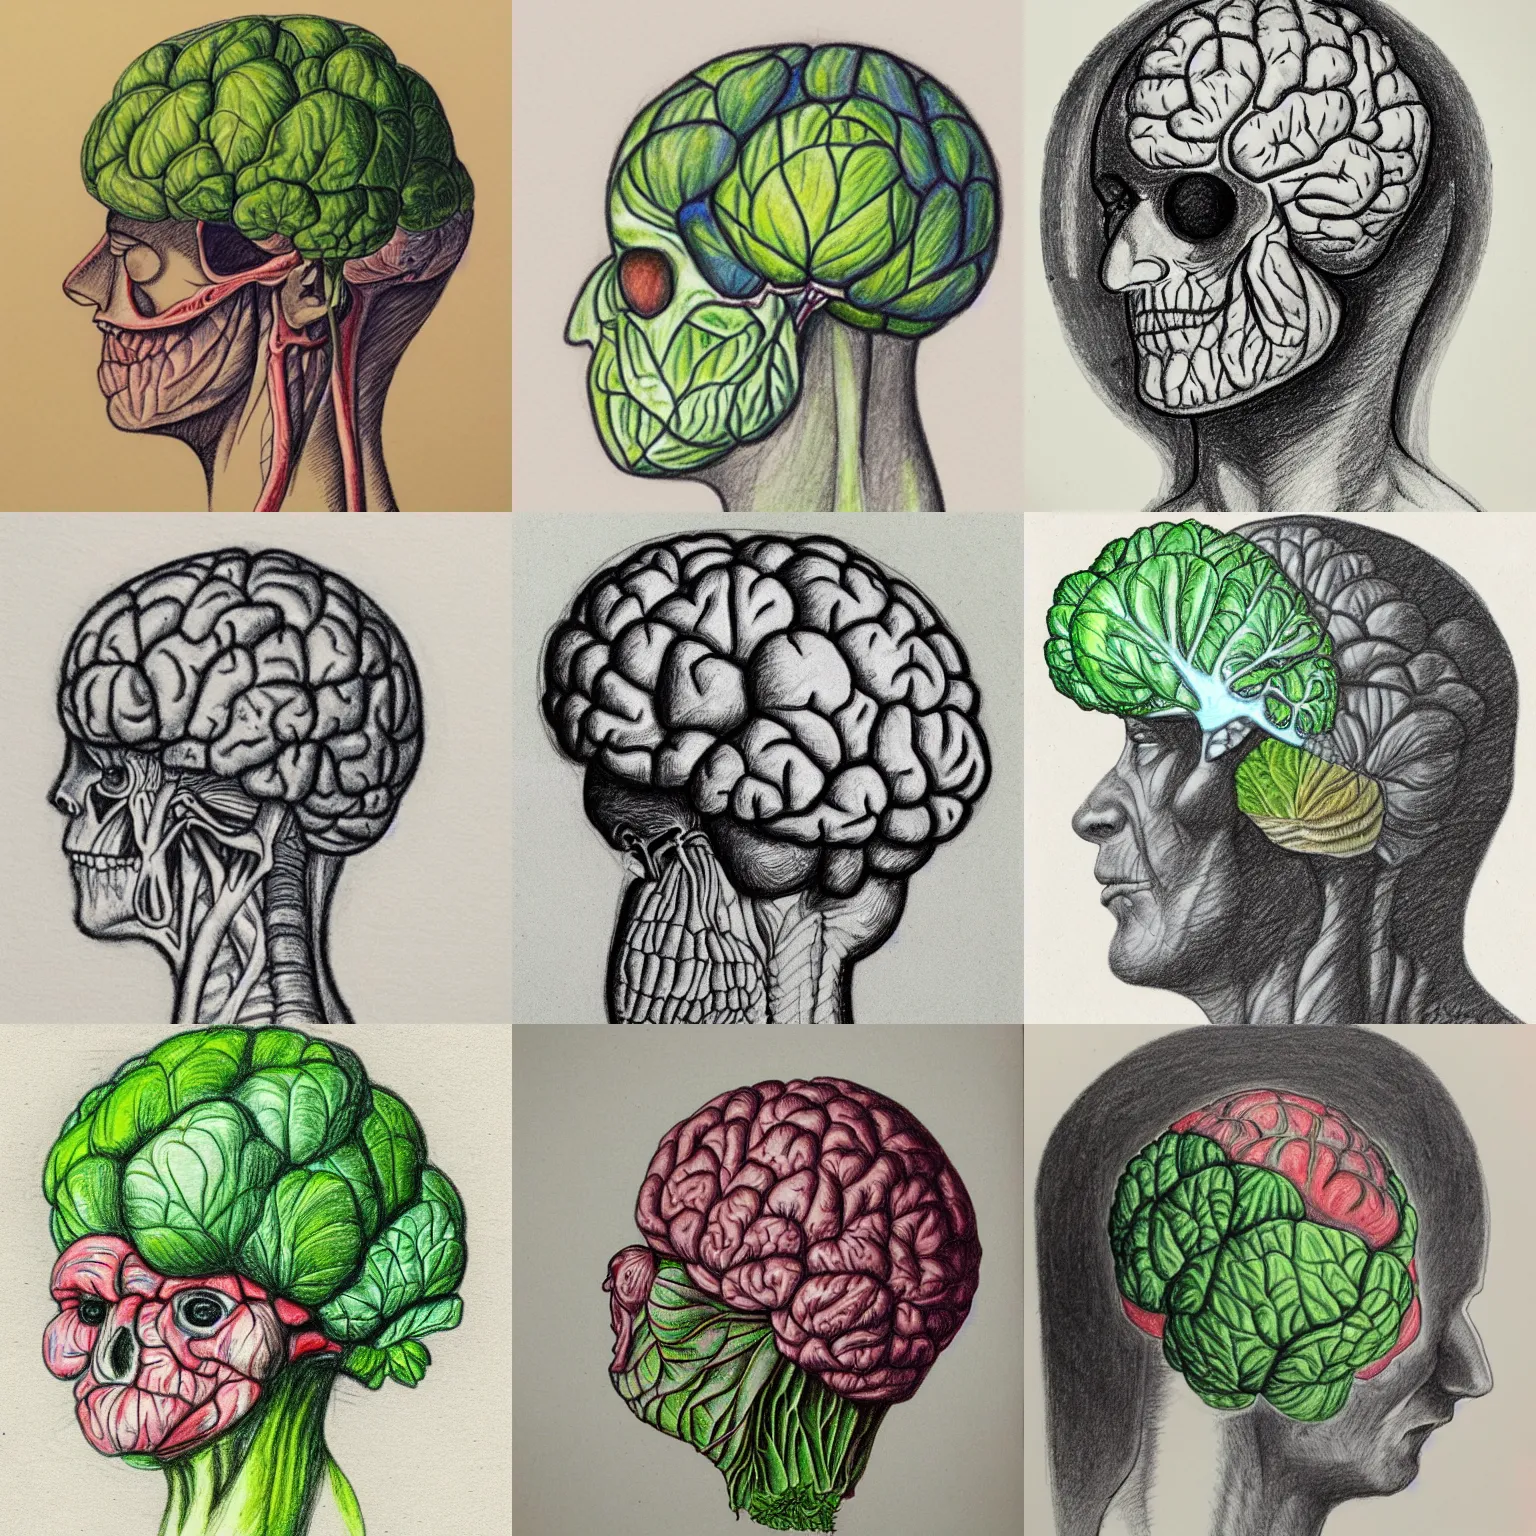 Prompt: sketch of a man with a cabbage brain, gazing down, anatomical diagram, colored pencil